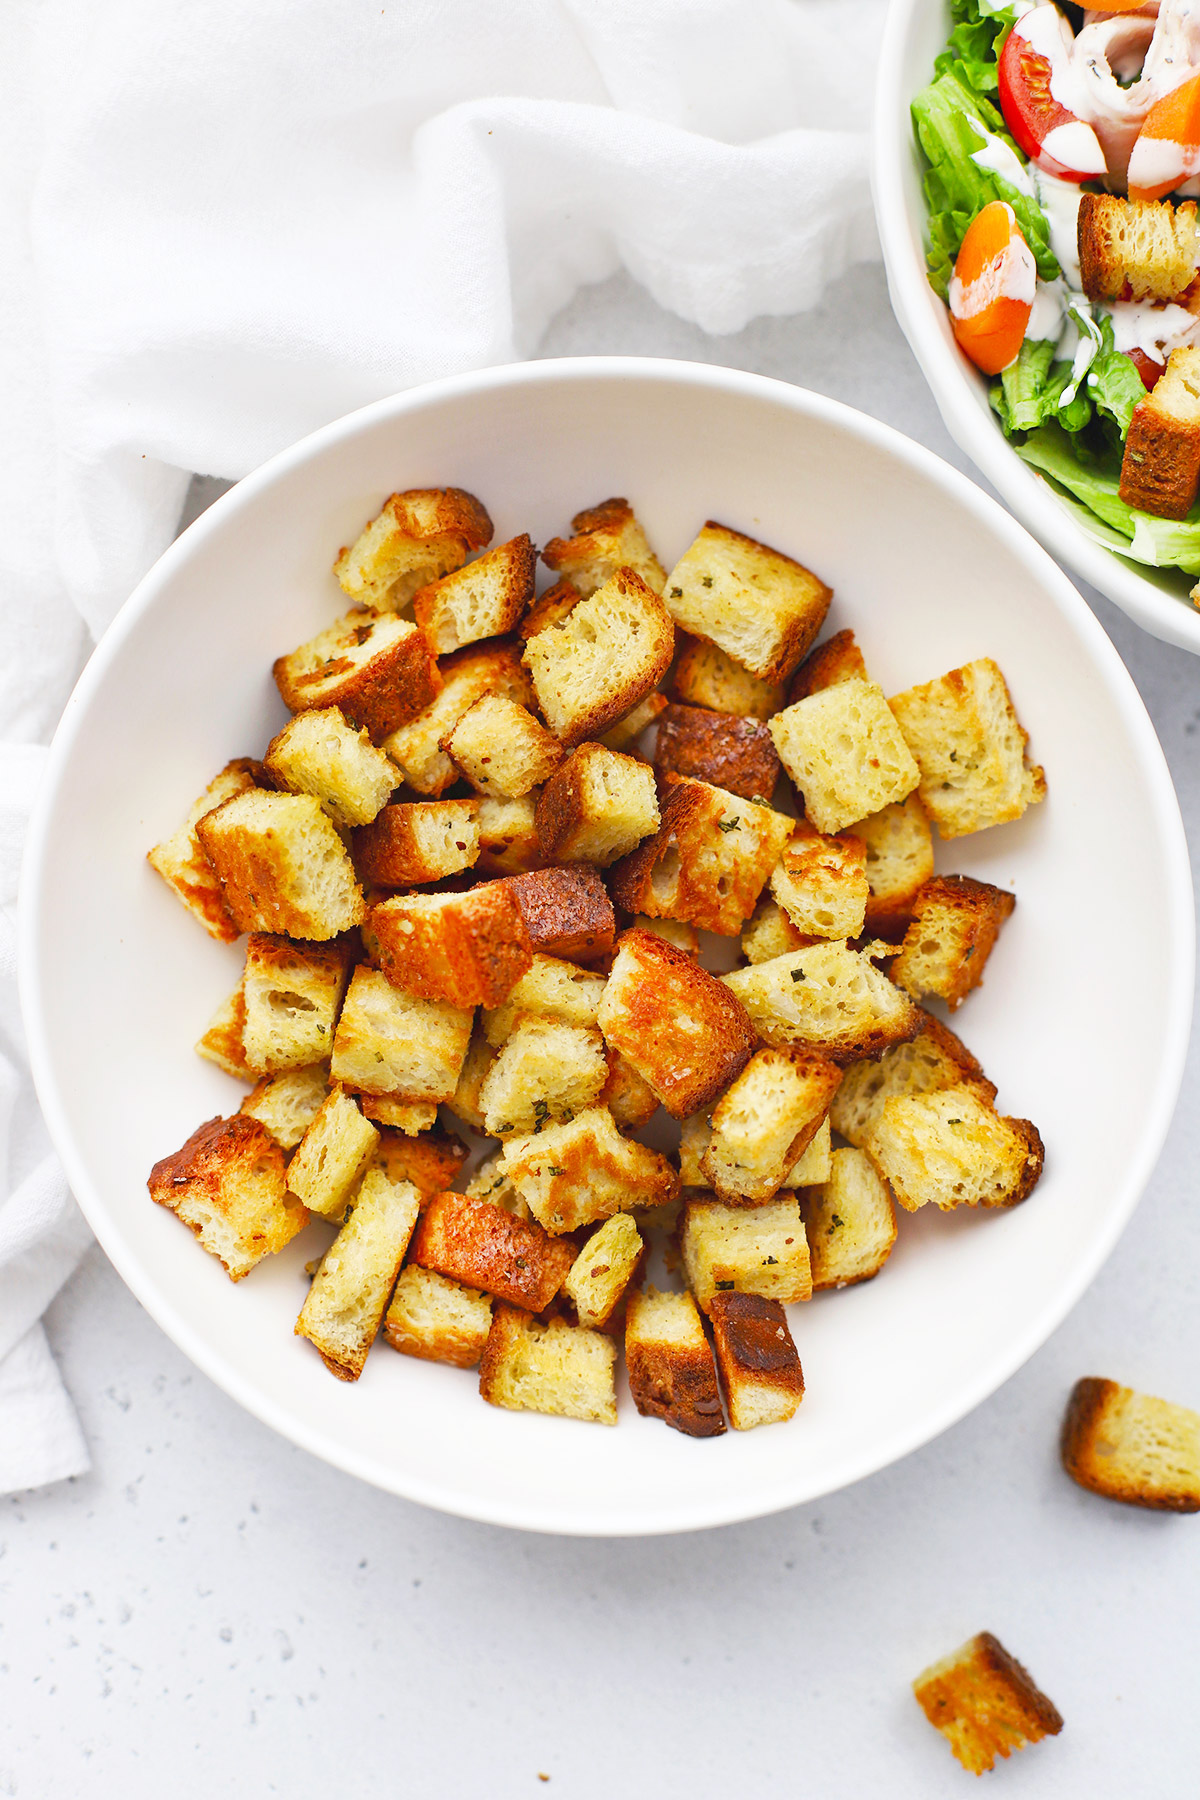 Gluten Free Croutons in a bowl next to salad